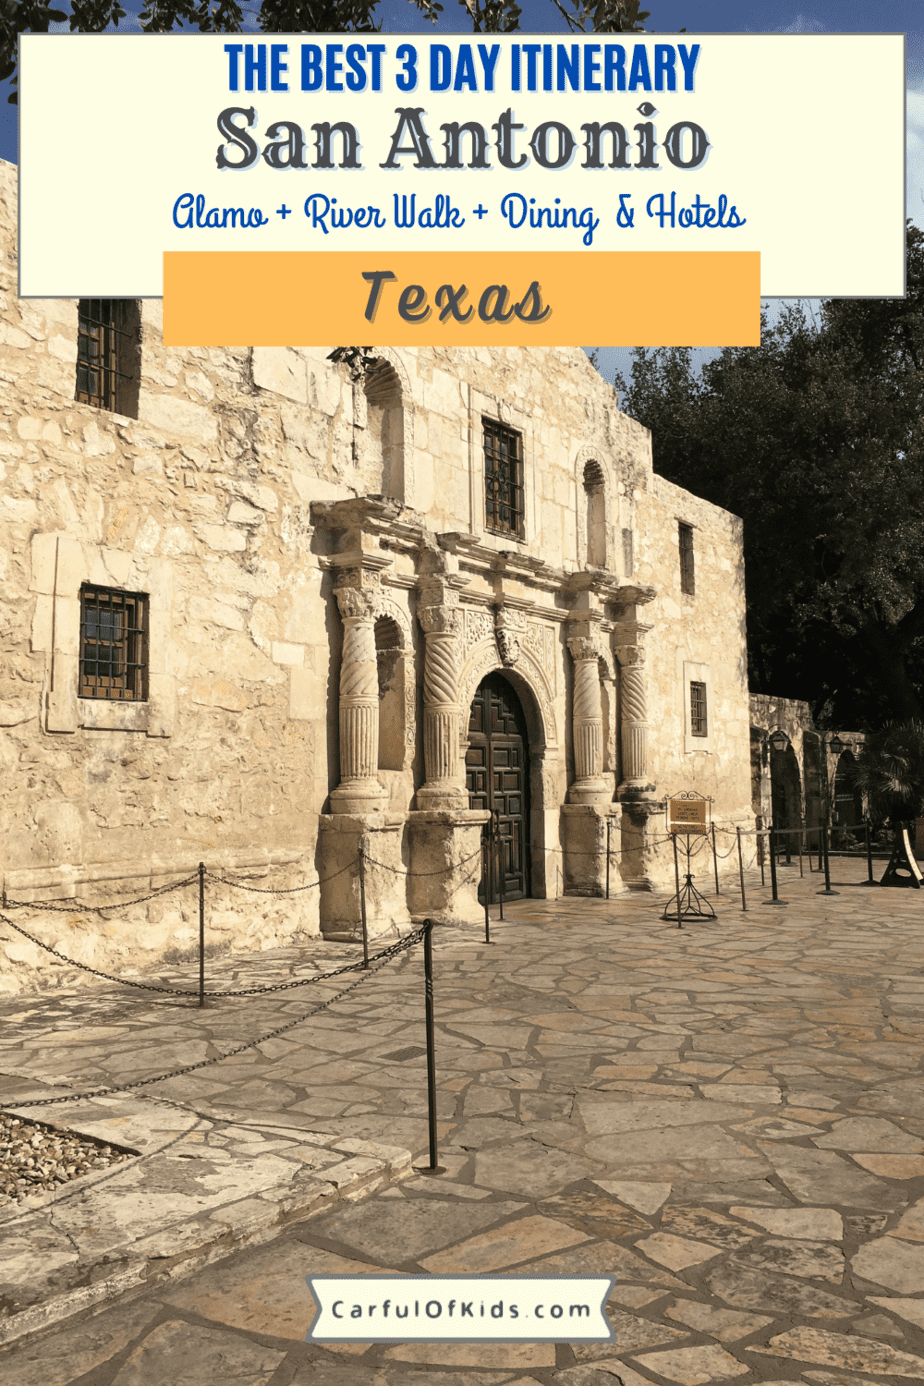 From the Alamo to the River Walk to the San Antonio Zoo and beyond, families love San Antonio. Here is where you need to go and stay during your weekend getaway. Also find recommendations for downtown San Antonio hotels and restaurants. Top Things to do in San Antonio with kids | Where to Stay in Downtown San Antonio #Texas #SanAntonio 